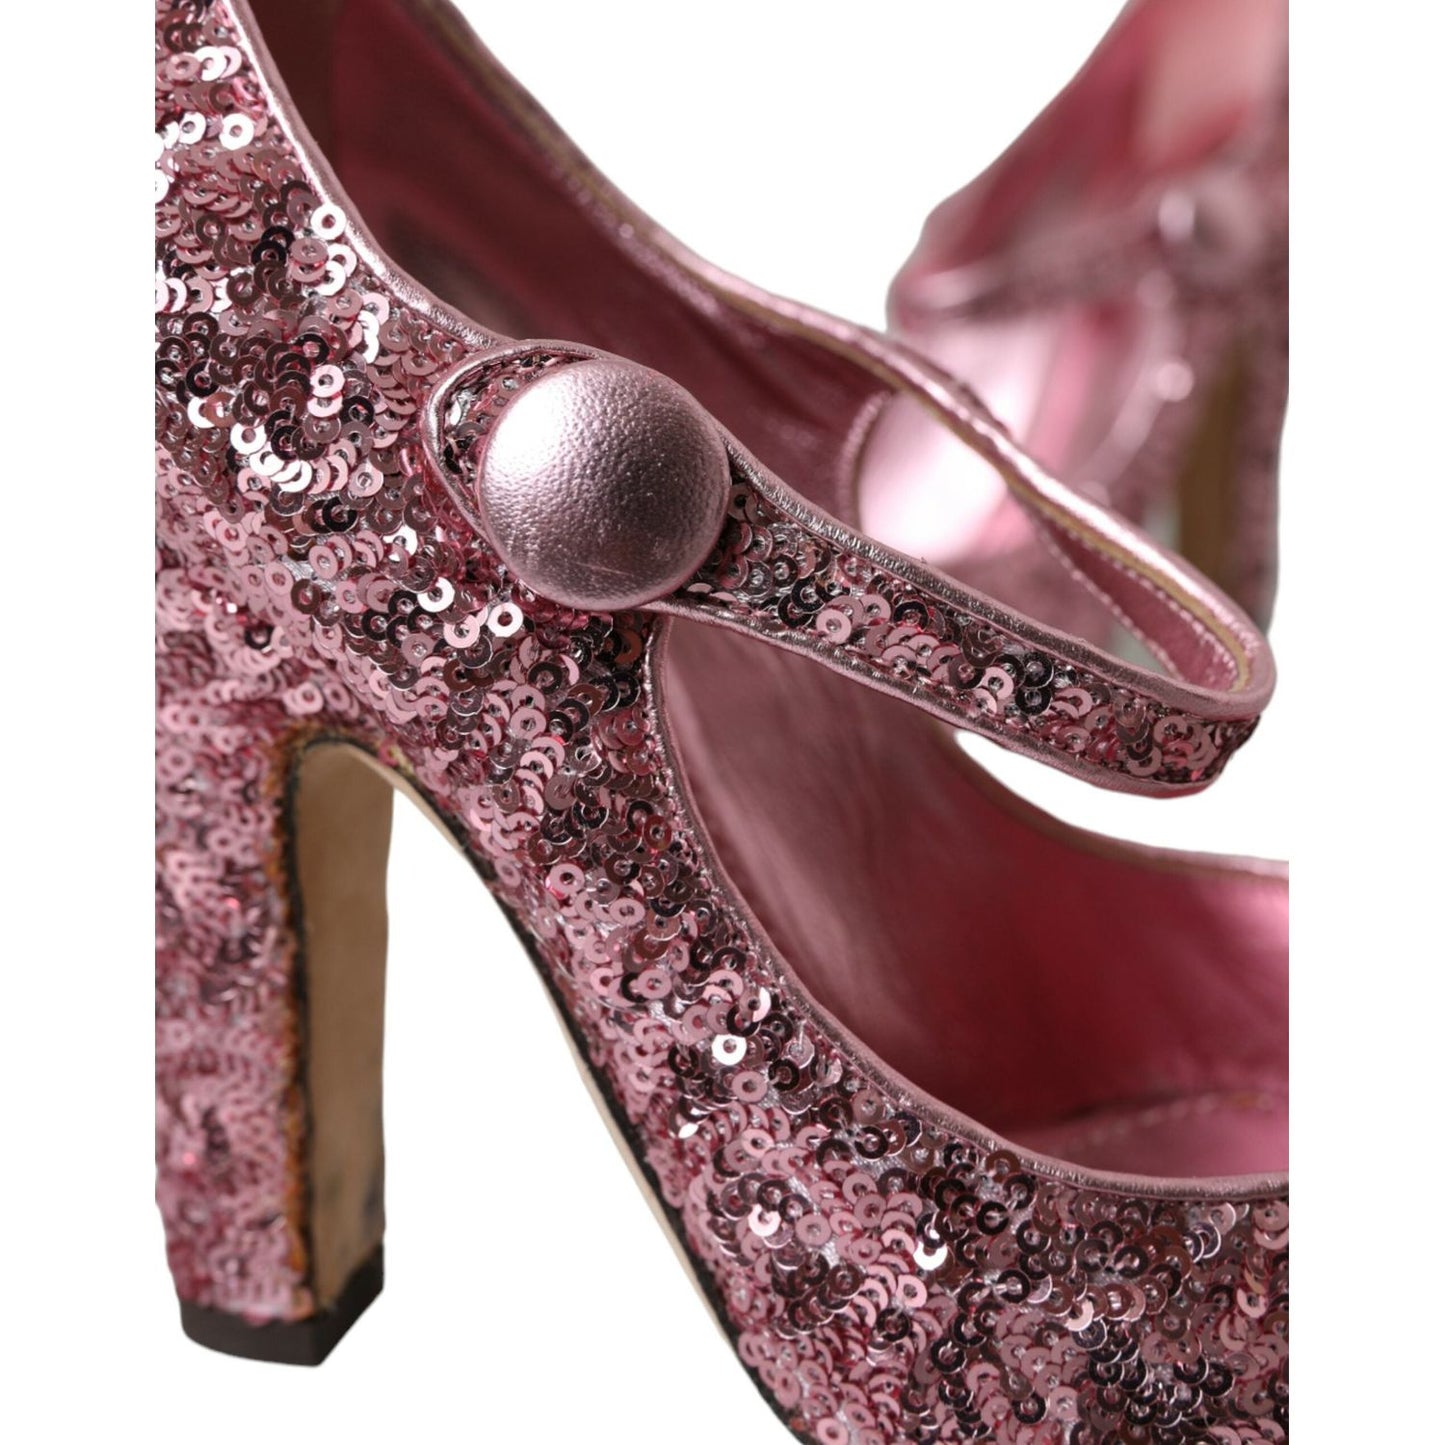 Dolce & Gabbana Pink Sequin Mary Jane Pumps High Heels Shoes pink-sequin-mary-jane-pumps-high-heels-shoes